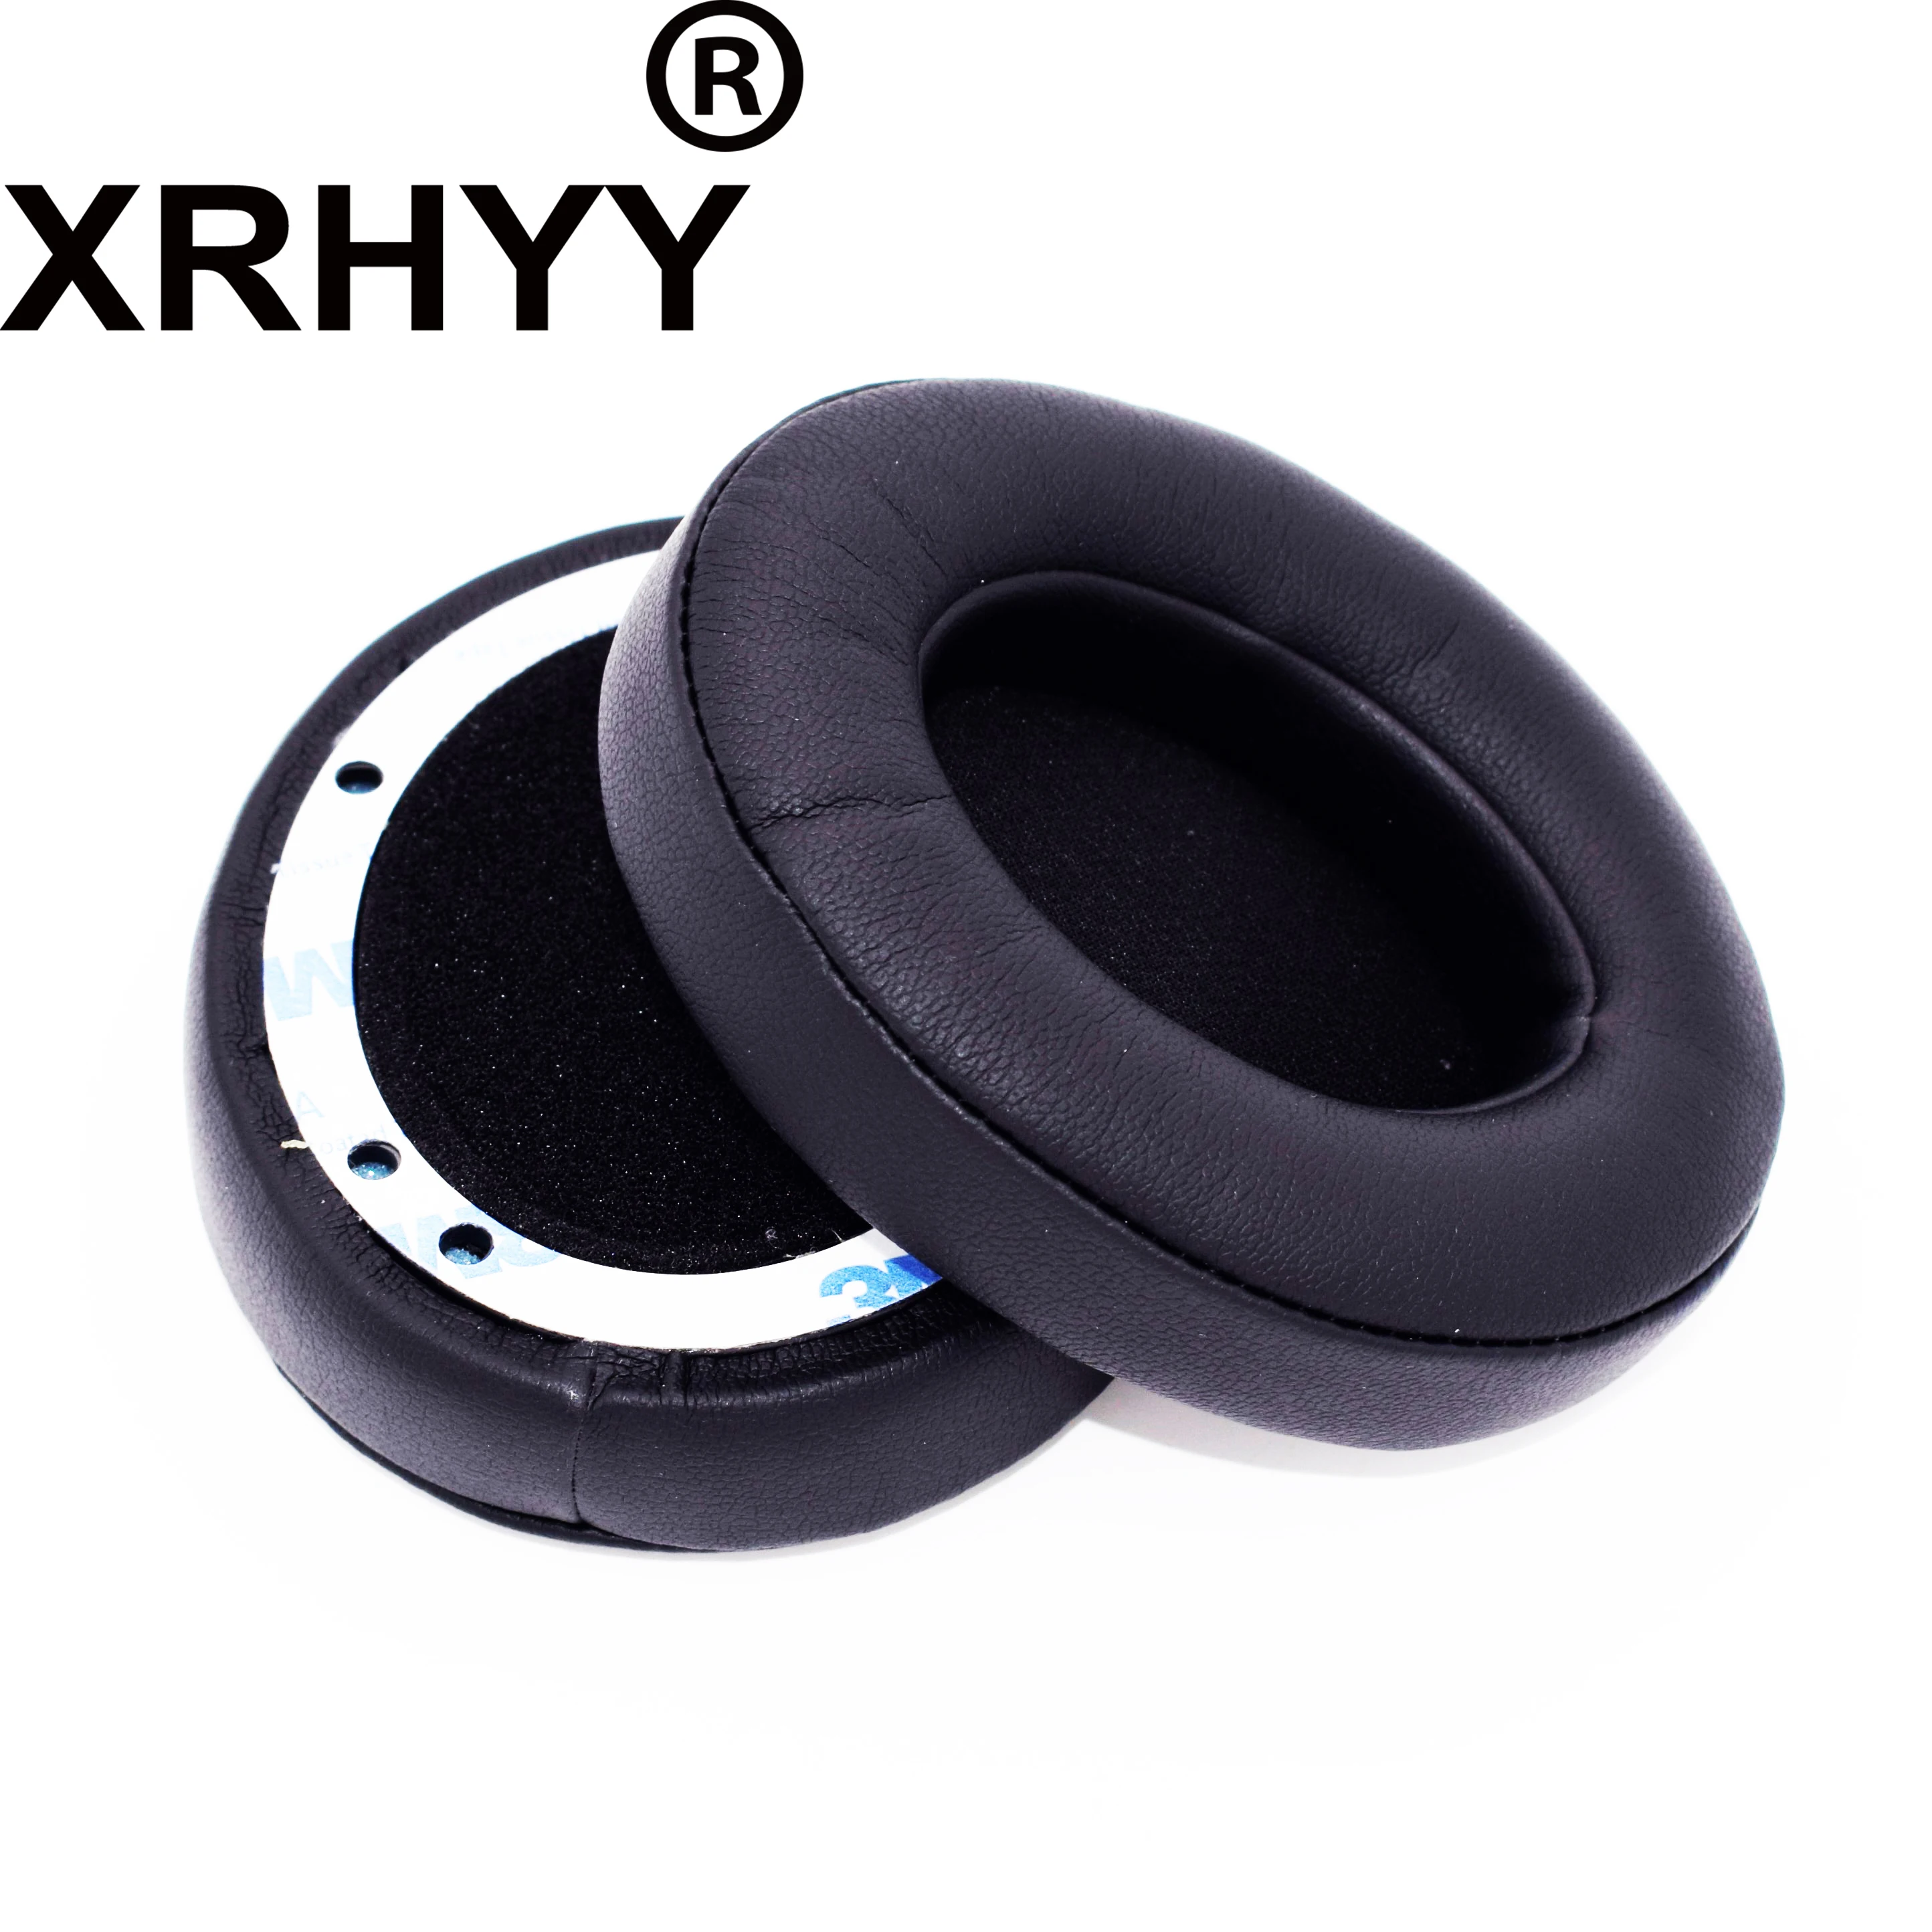 XRHYY Black Replacement EarPads Cushion 